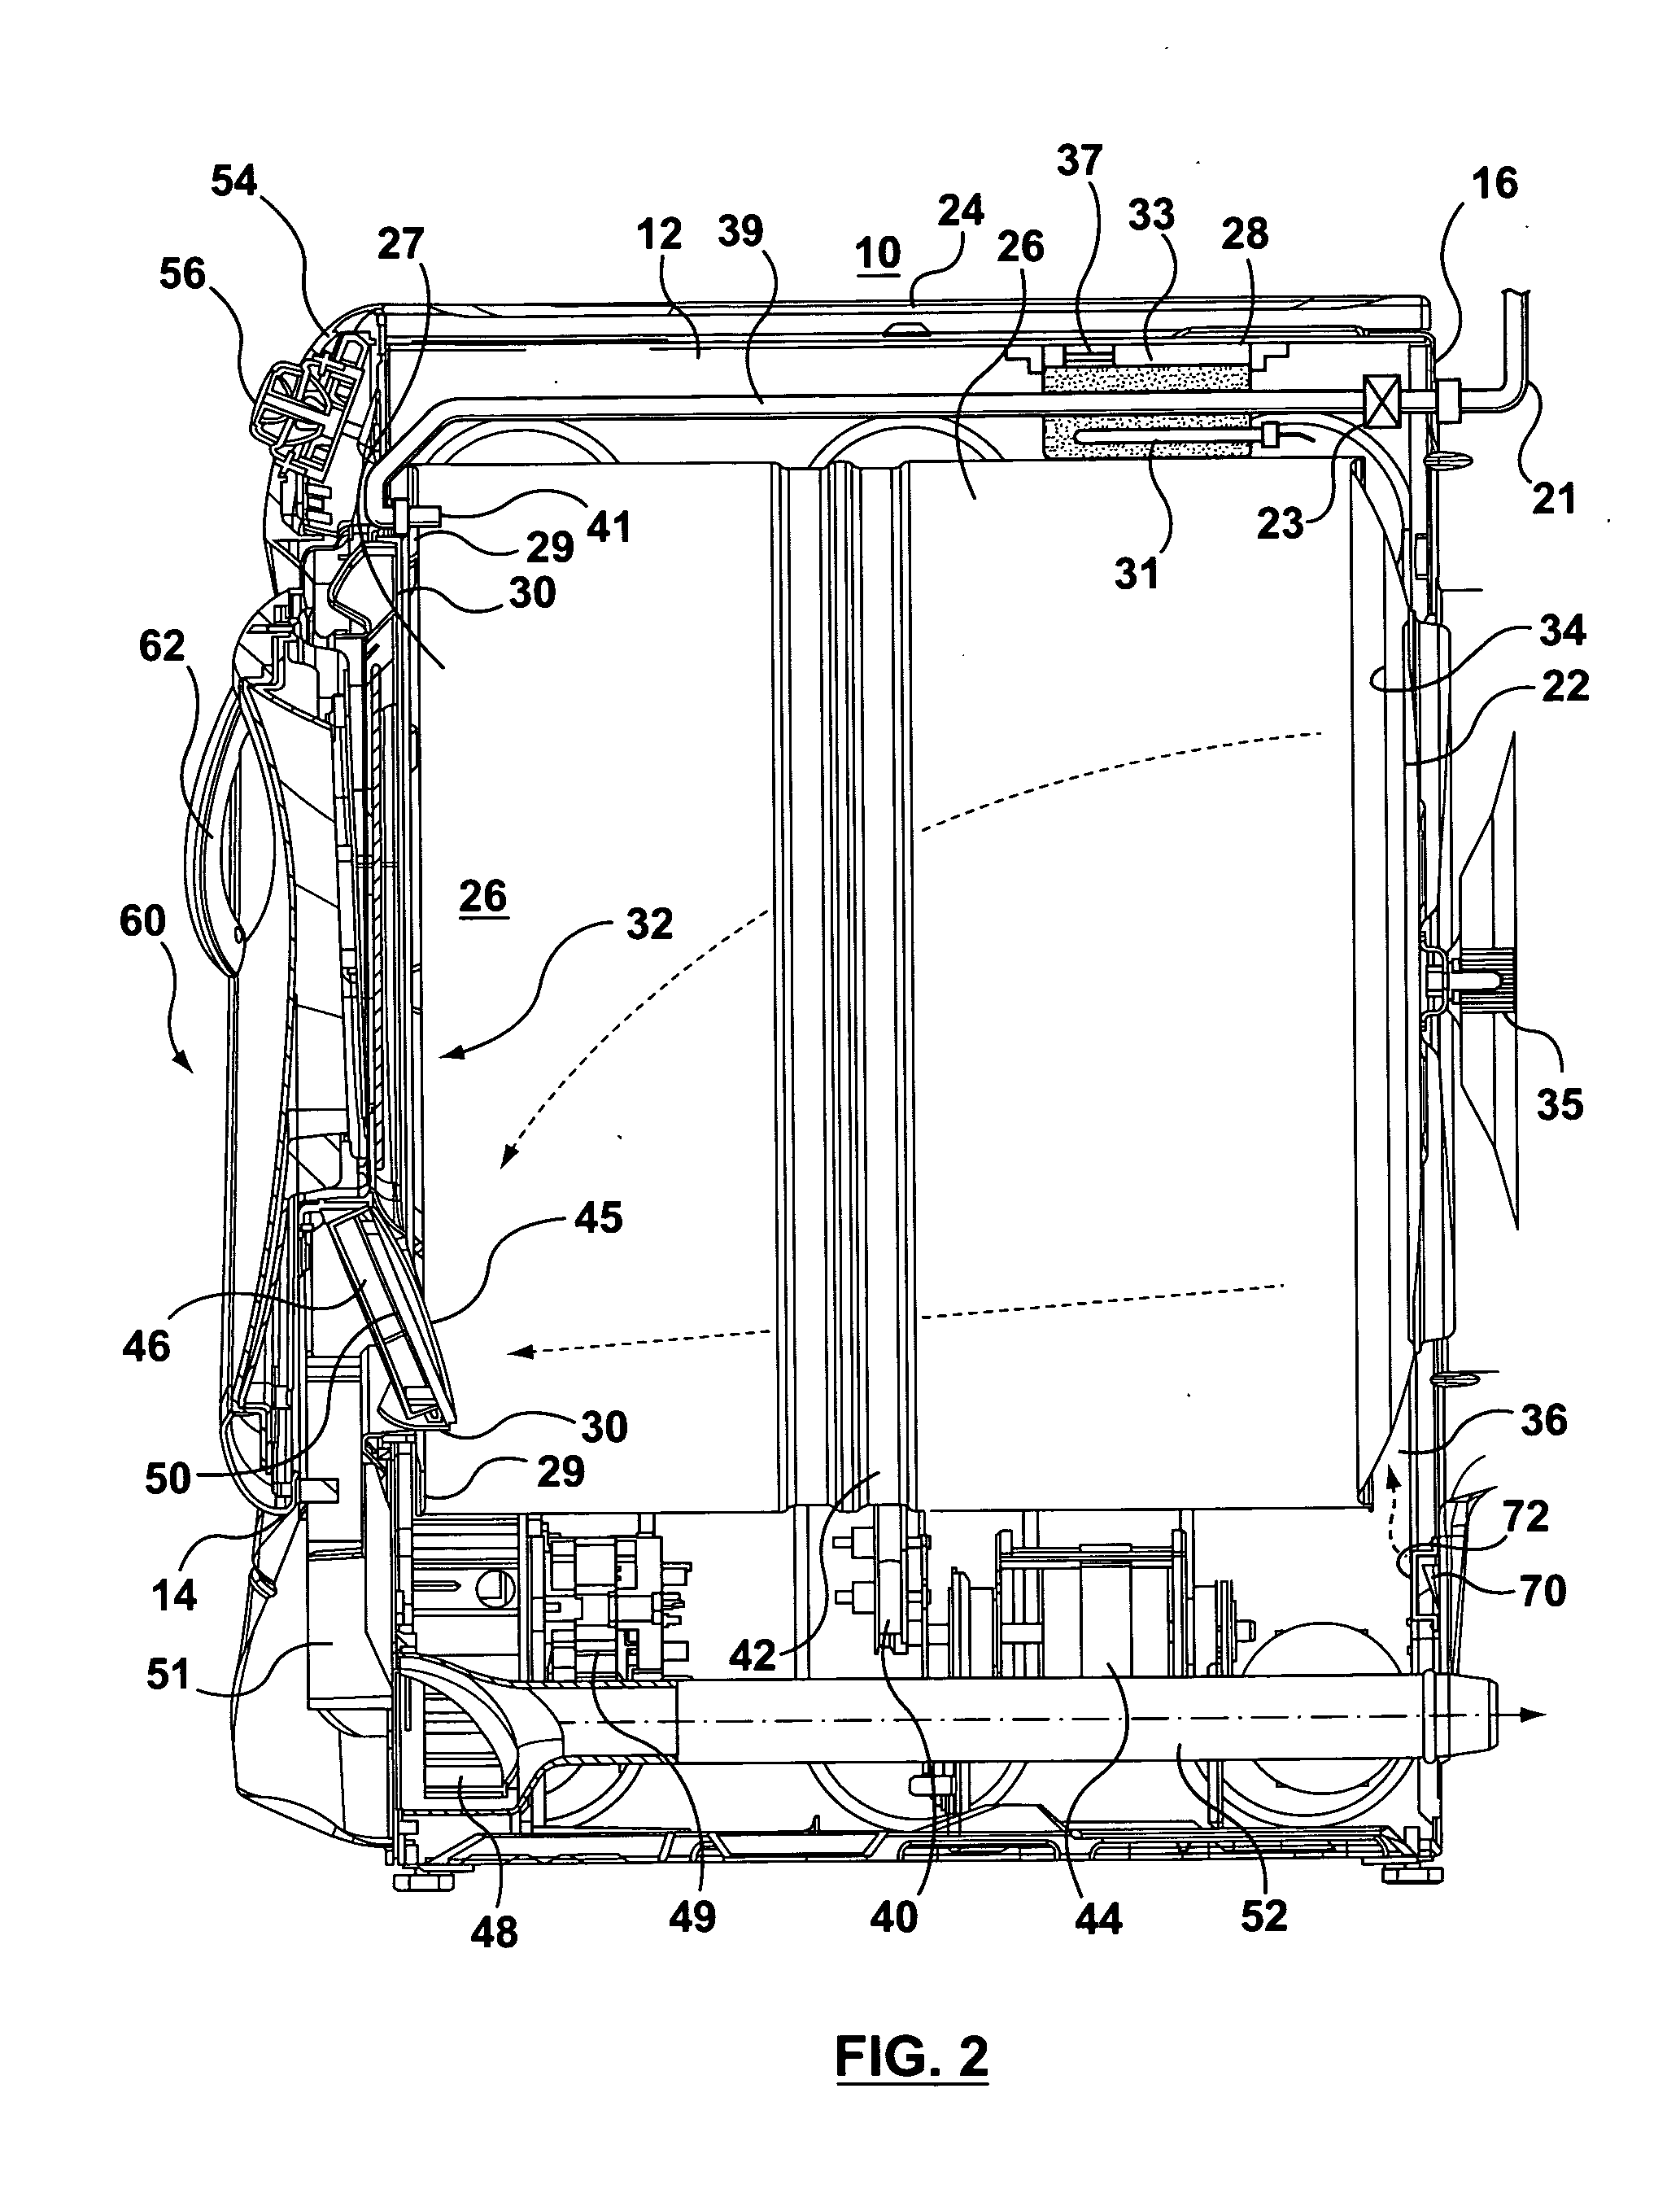 Clothes dryer apparatus and method for de-wrinkling clothes with reduced condensation